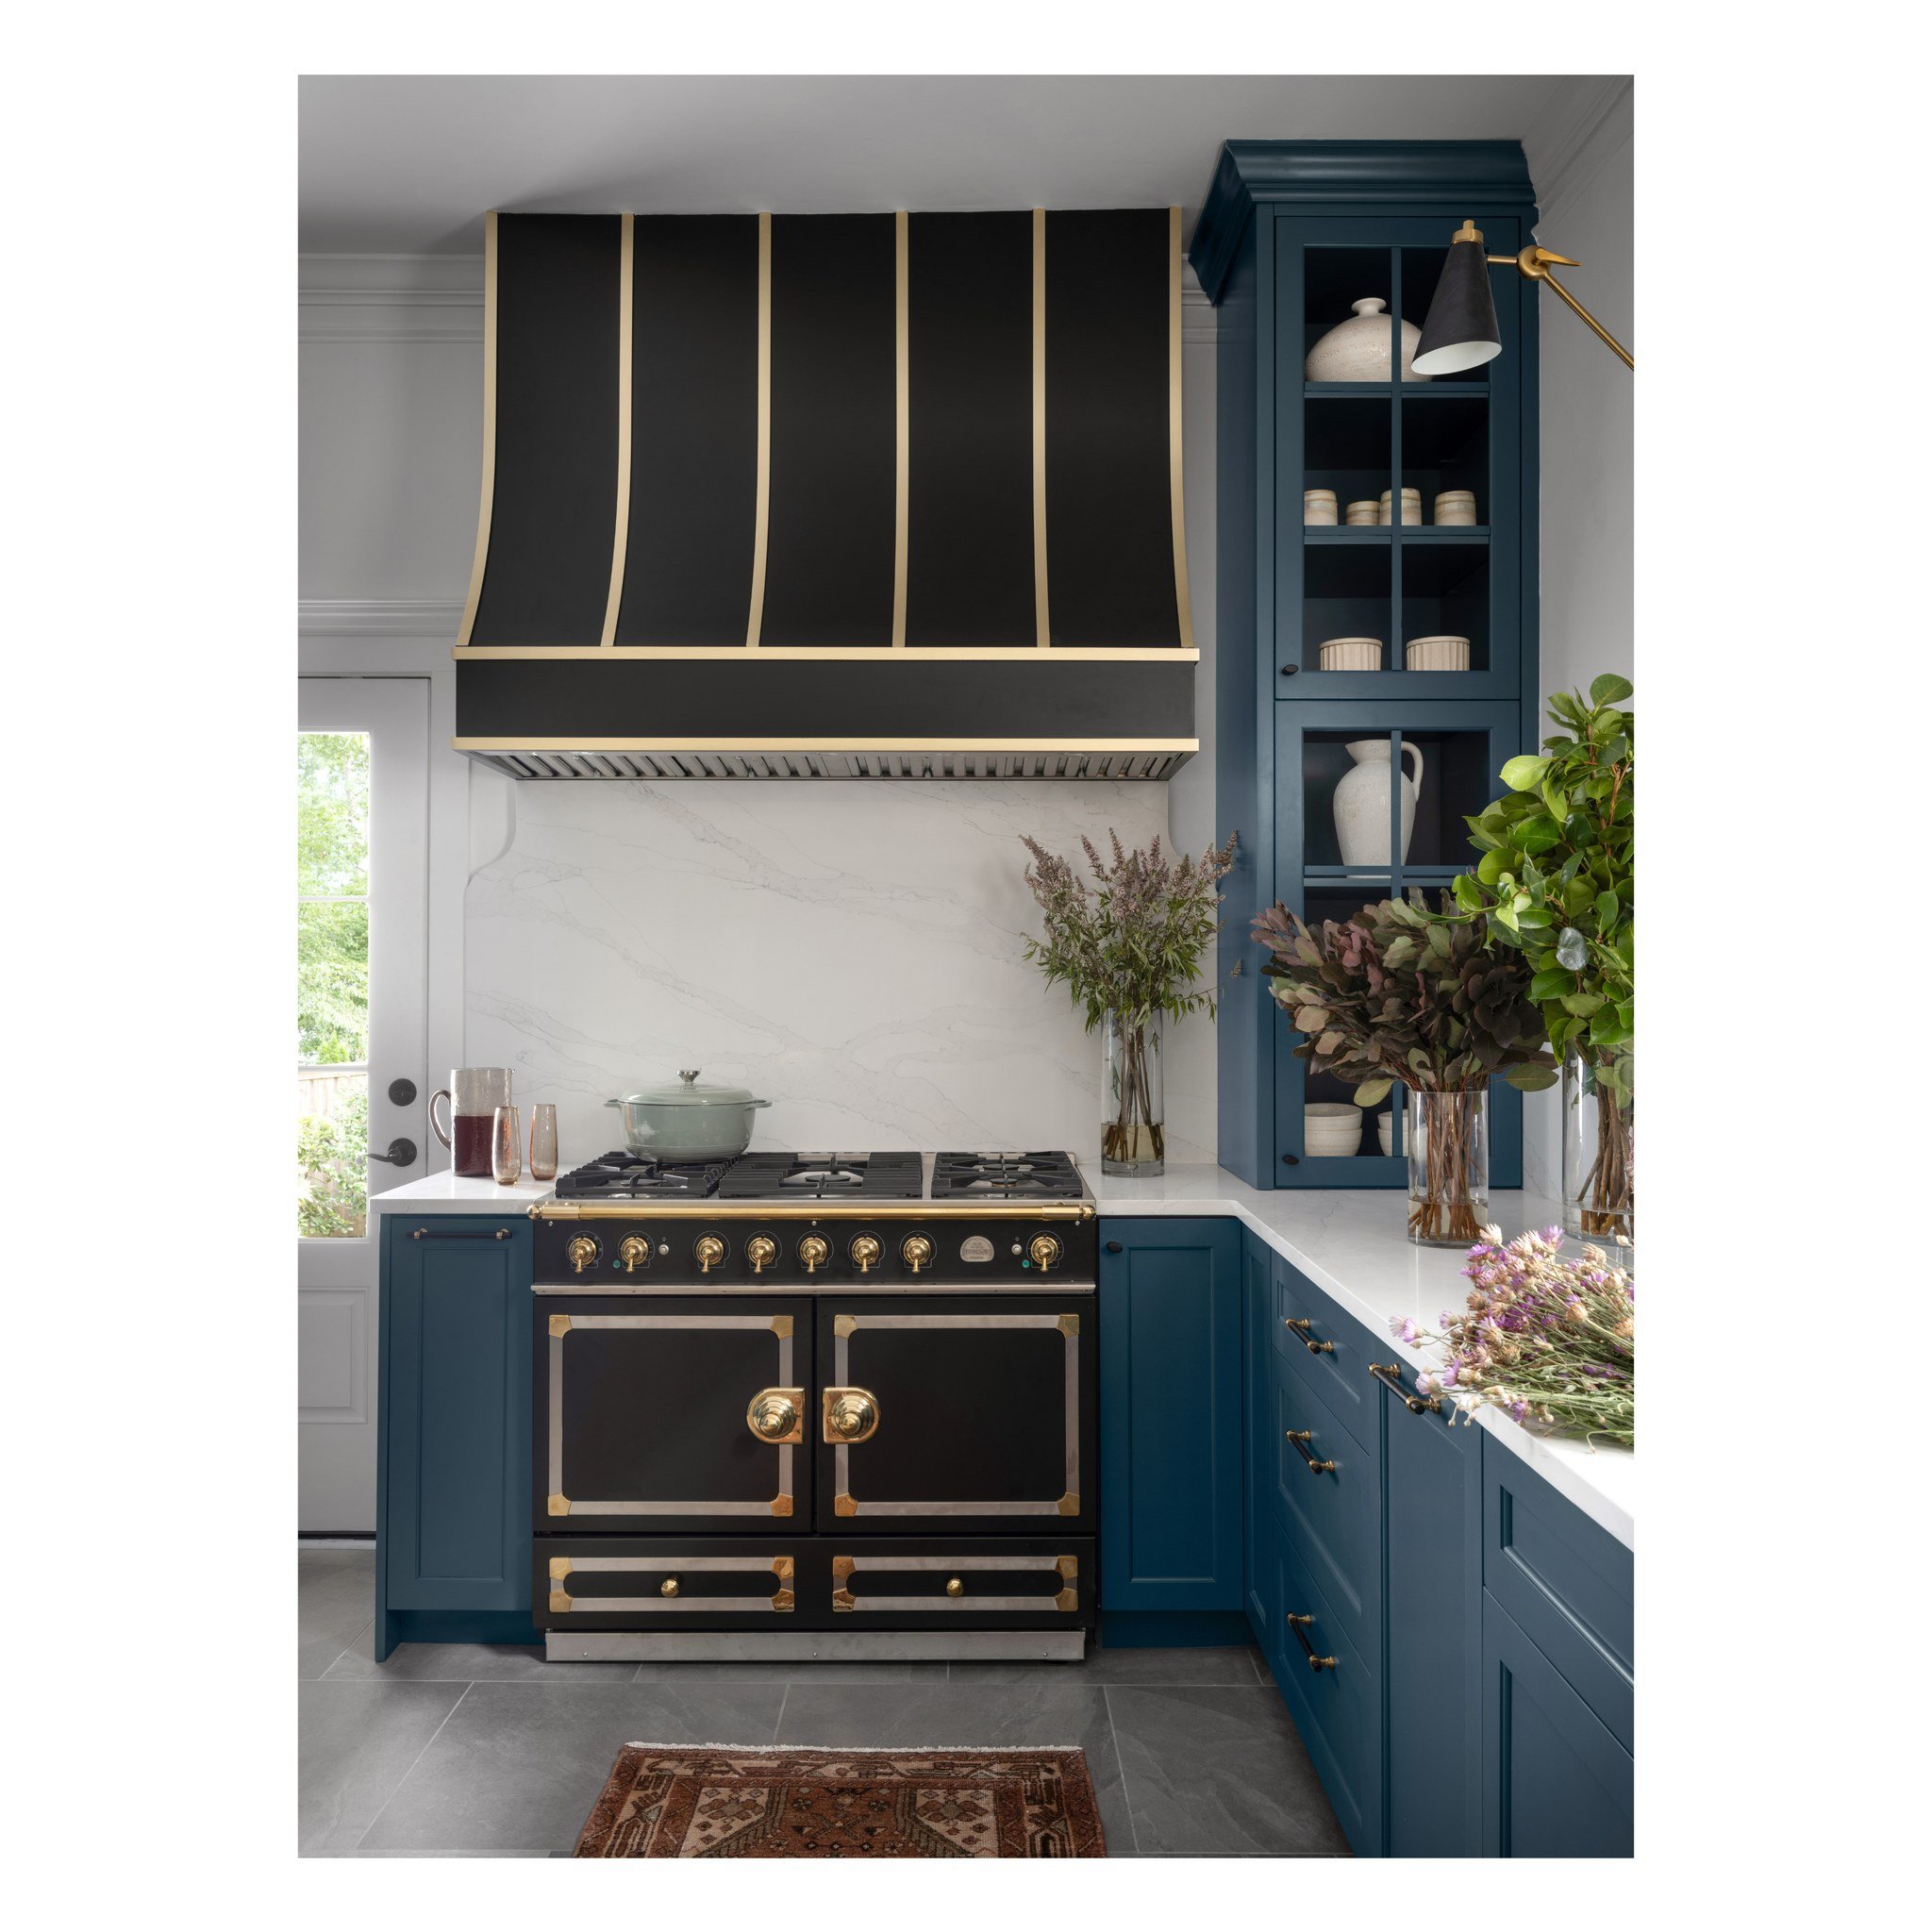 A kitchen that makes you excited to cook. 

Thoughtfully mapped out storage space for ease and functionality, glass cabinetry for visual appeal, sprawling countertops for preparation, creating a culinary sanctuary. 

***
@benjaminmoore 
@walkerzanger